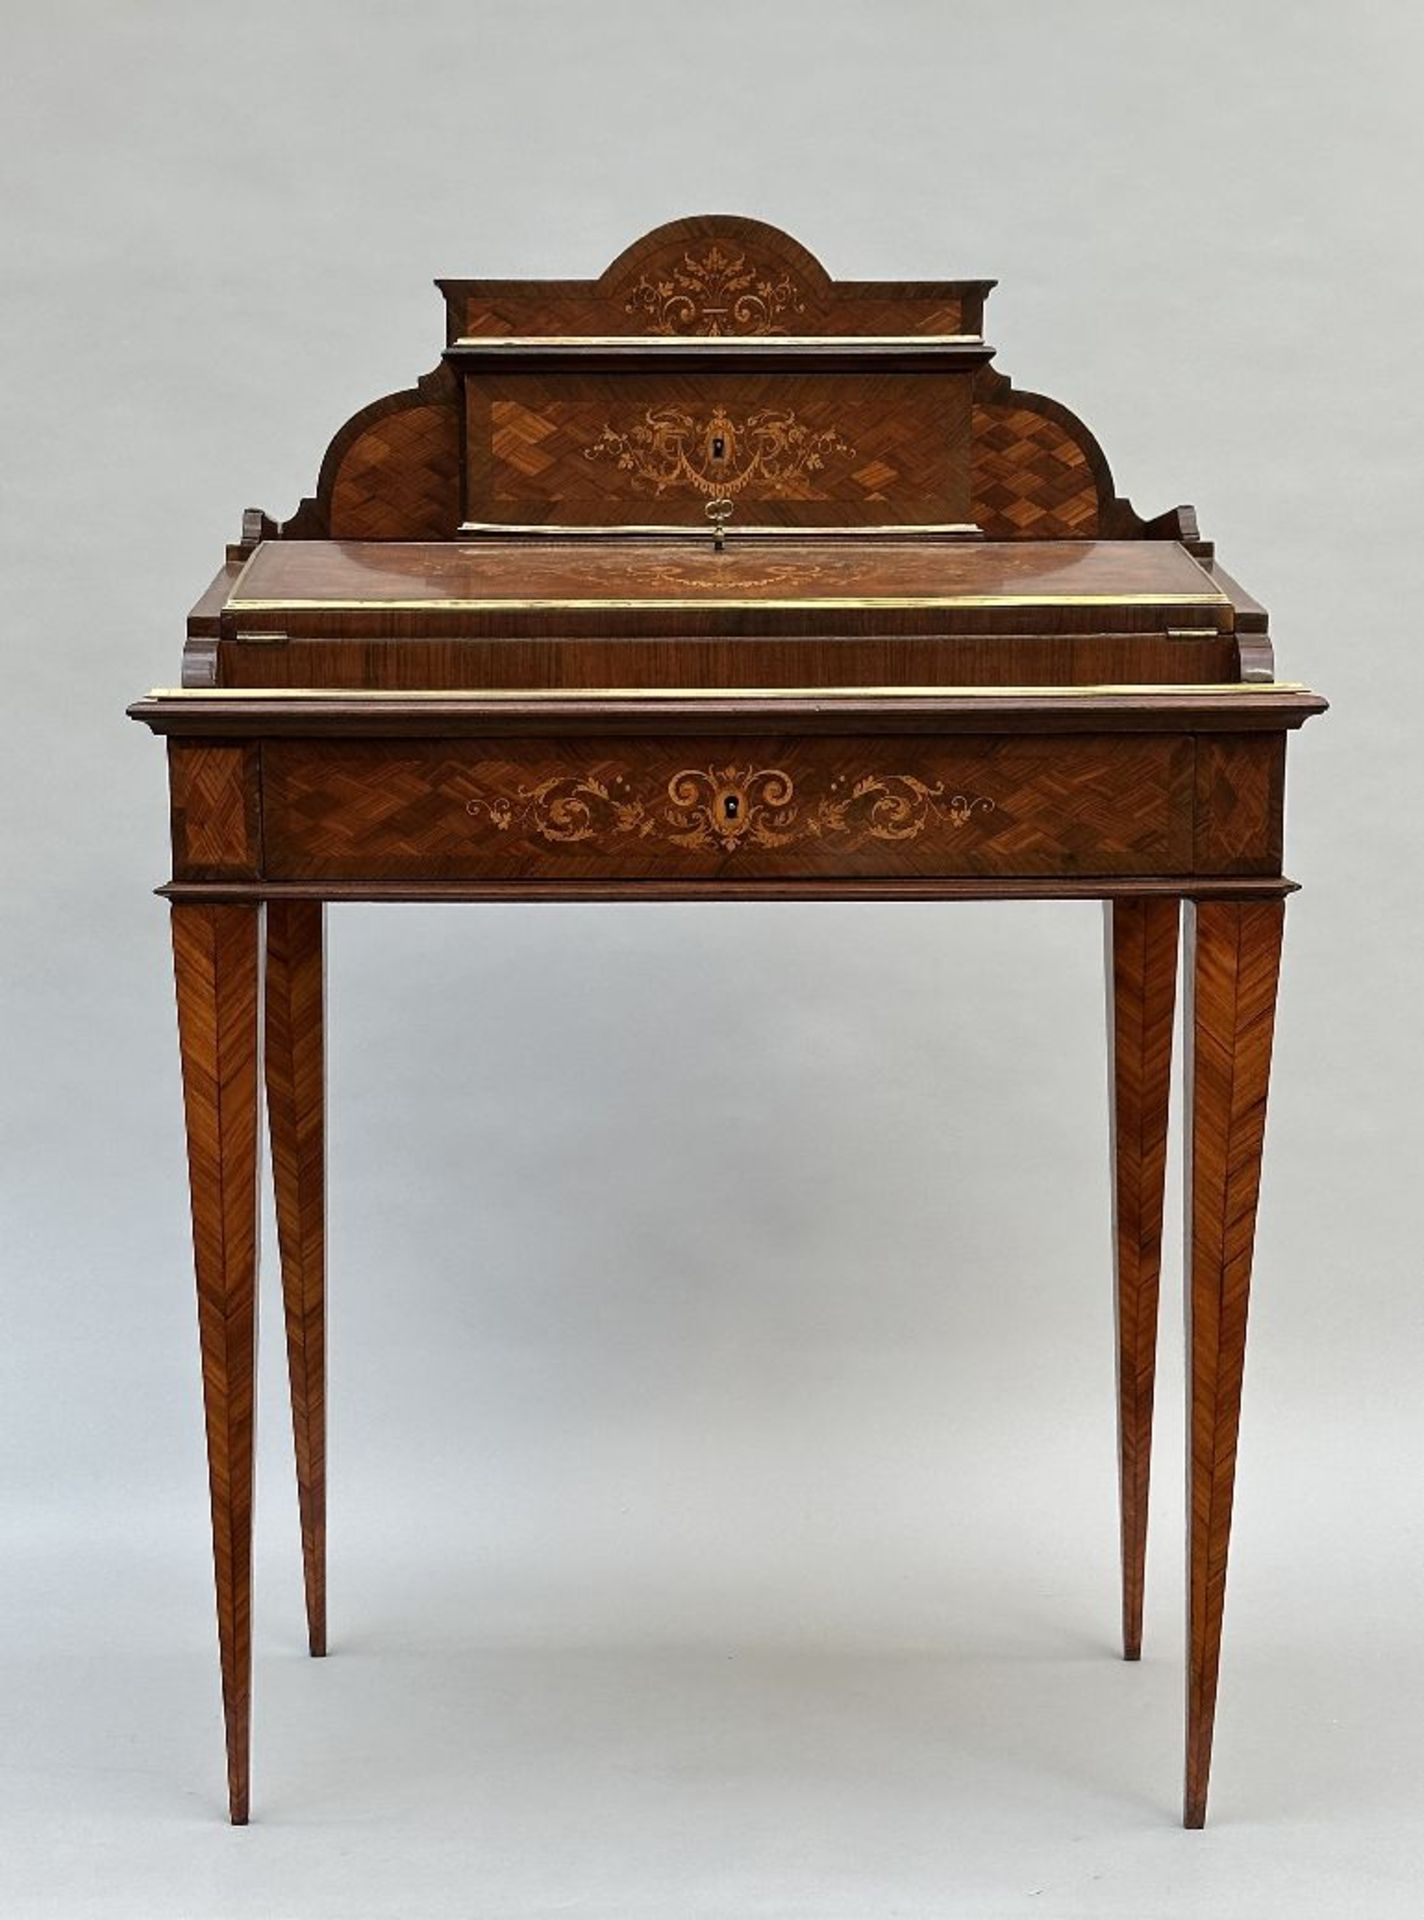 A Louis XVI style desk with inlaywork, 19th century